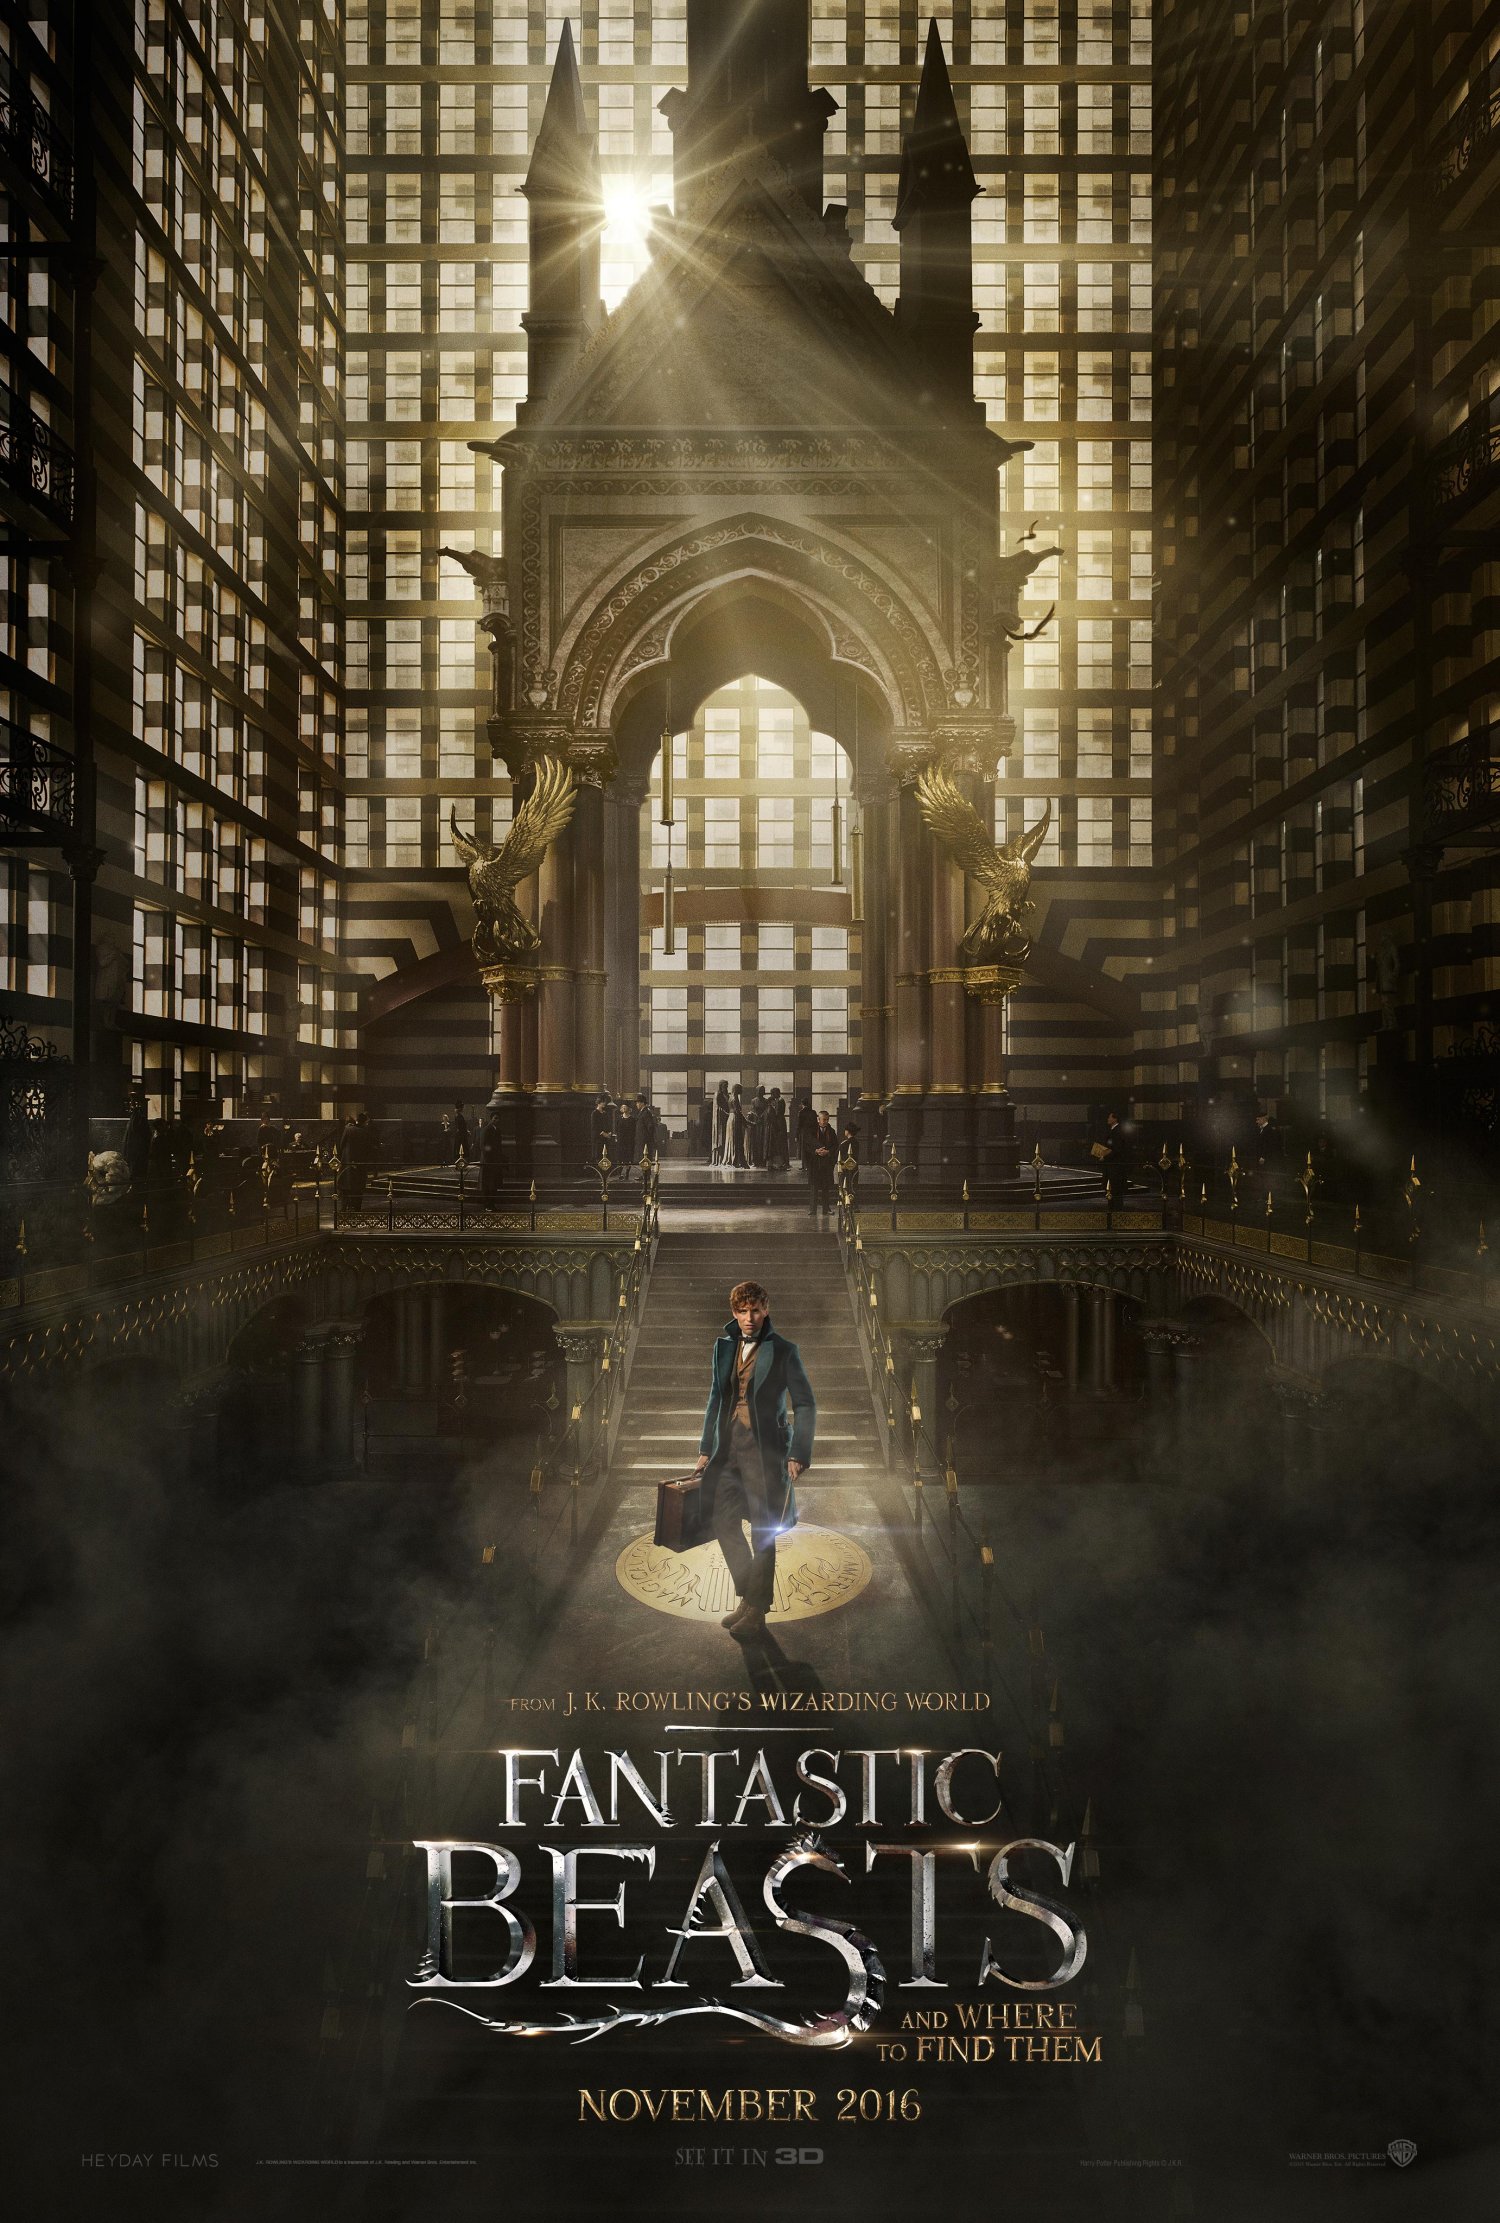 Online Fantastic Beasts And Where To Find Them Movie 2016 Full-Length Watch